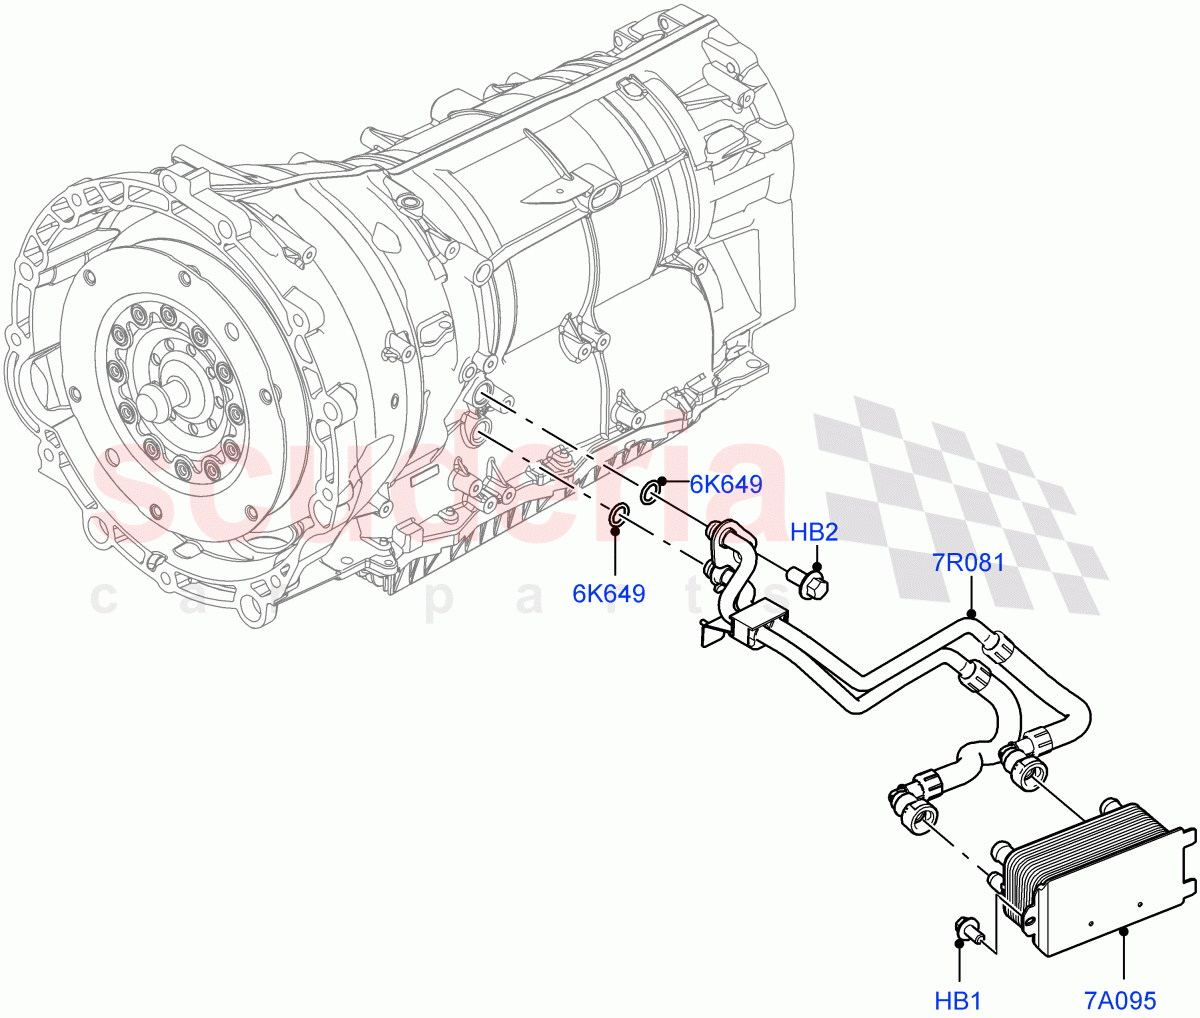 Transmission Cooling Systems(Nitra Plant Build)(3.0L AJ20P6 Petrol High,8 Speed Auto Trans ZF 8HP76,3.0L AJ20D6 Diesel High) of Land Rover Land Rover Defender (2020+) [2.0 Turbo Petrol AJ200P]